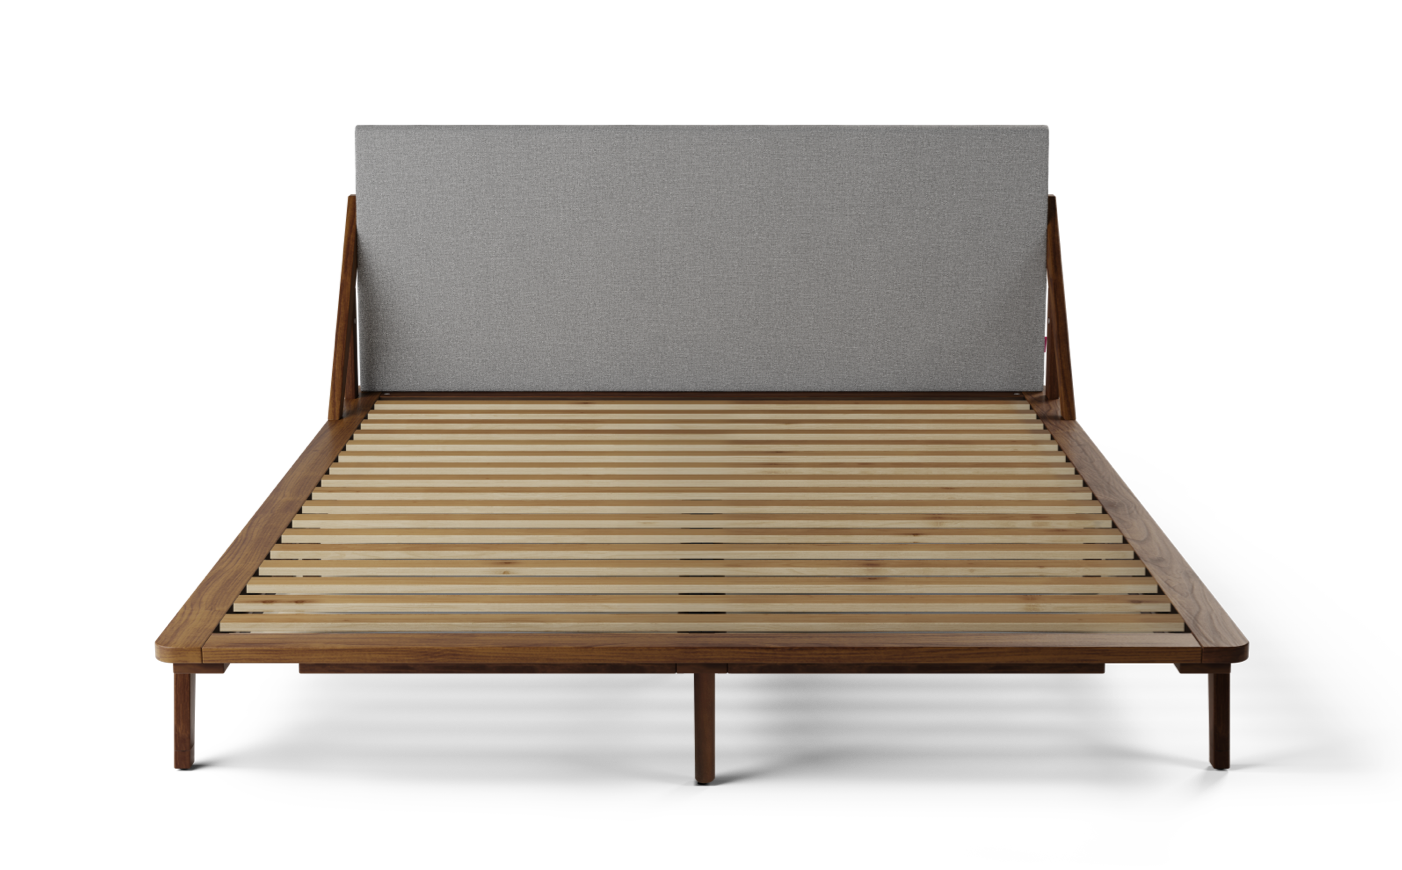 Product image of the Endy Solid Wood Bed.